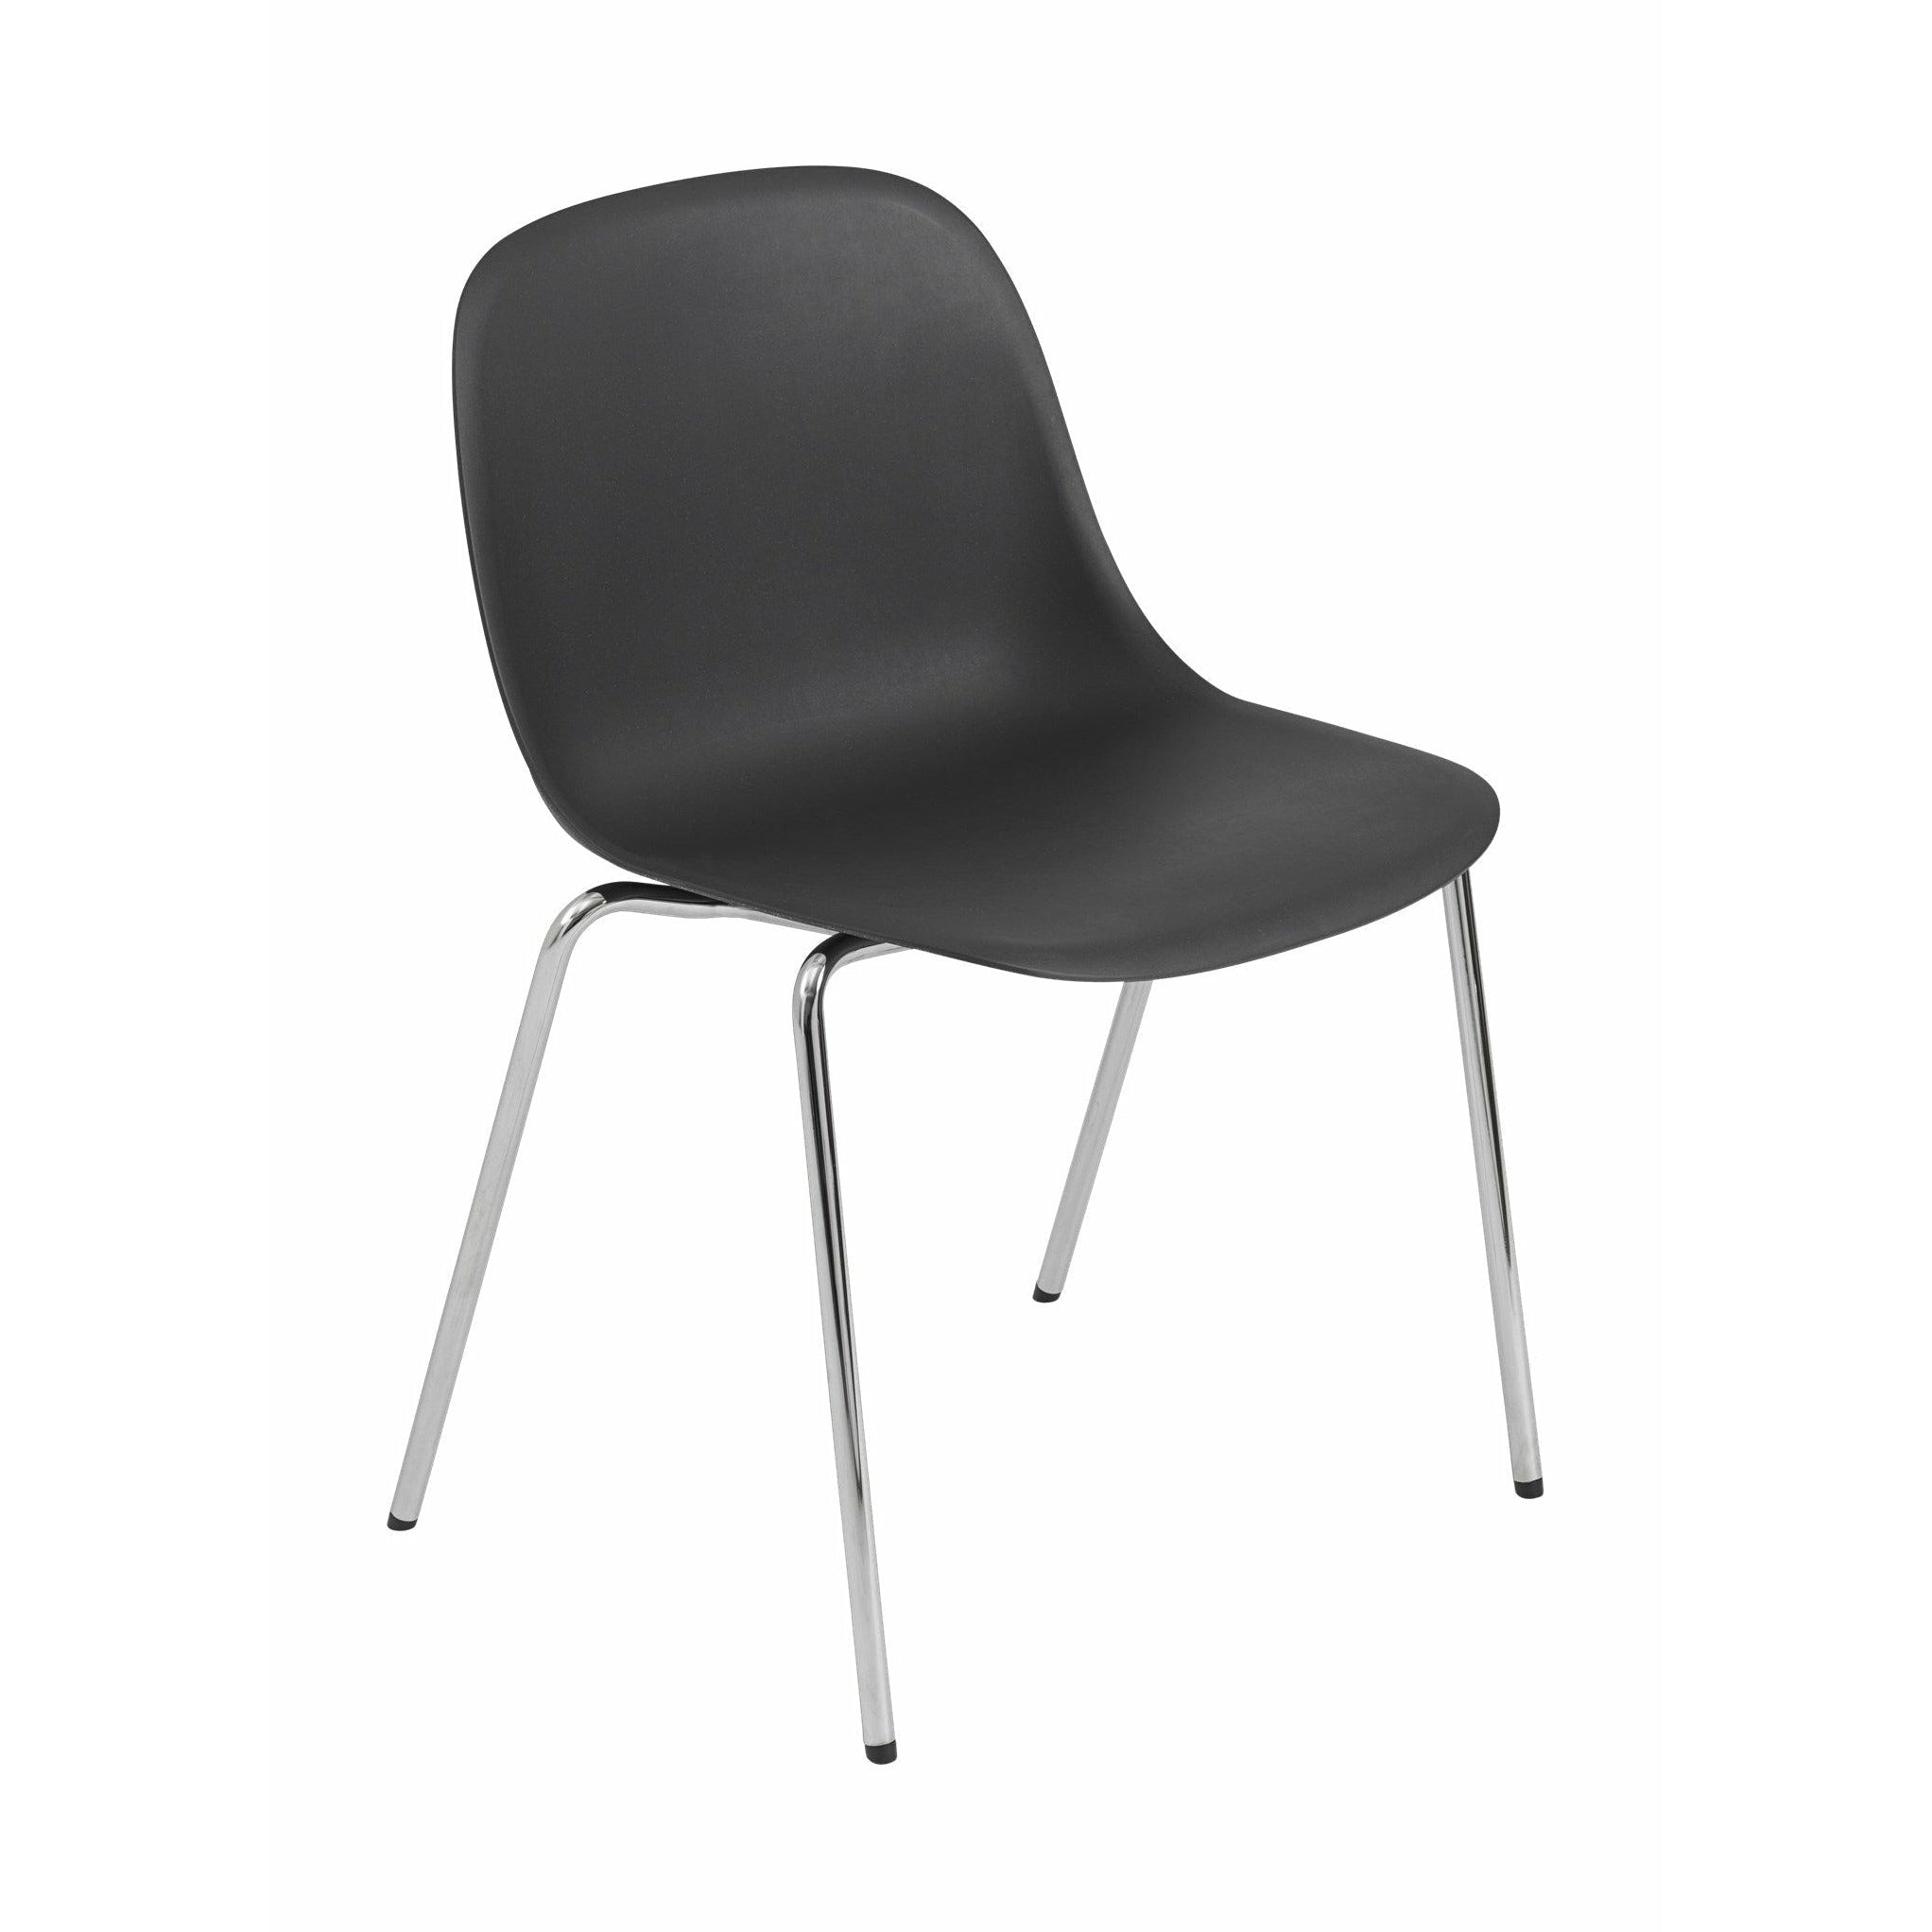 Muuto Fiber Side Chair Made Of Recycled Plastic A Base, Black/Chrome